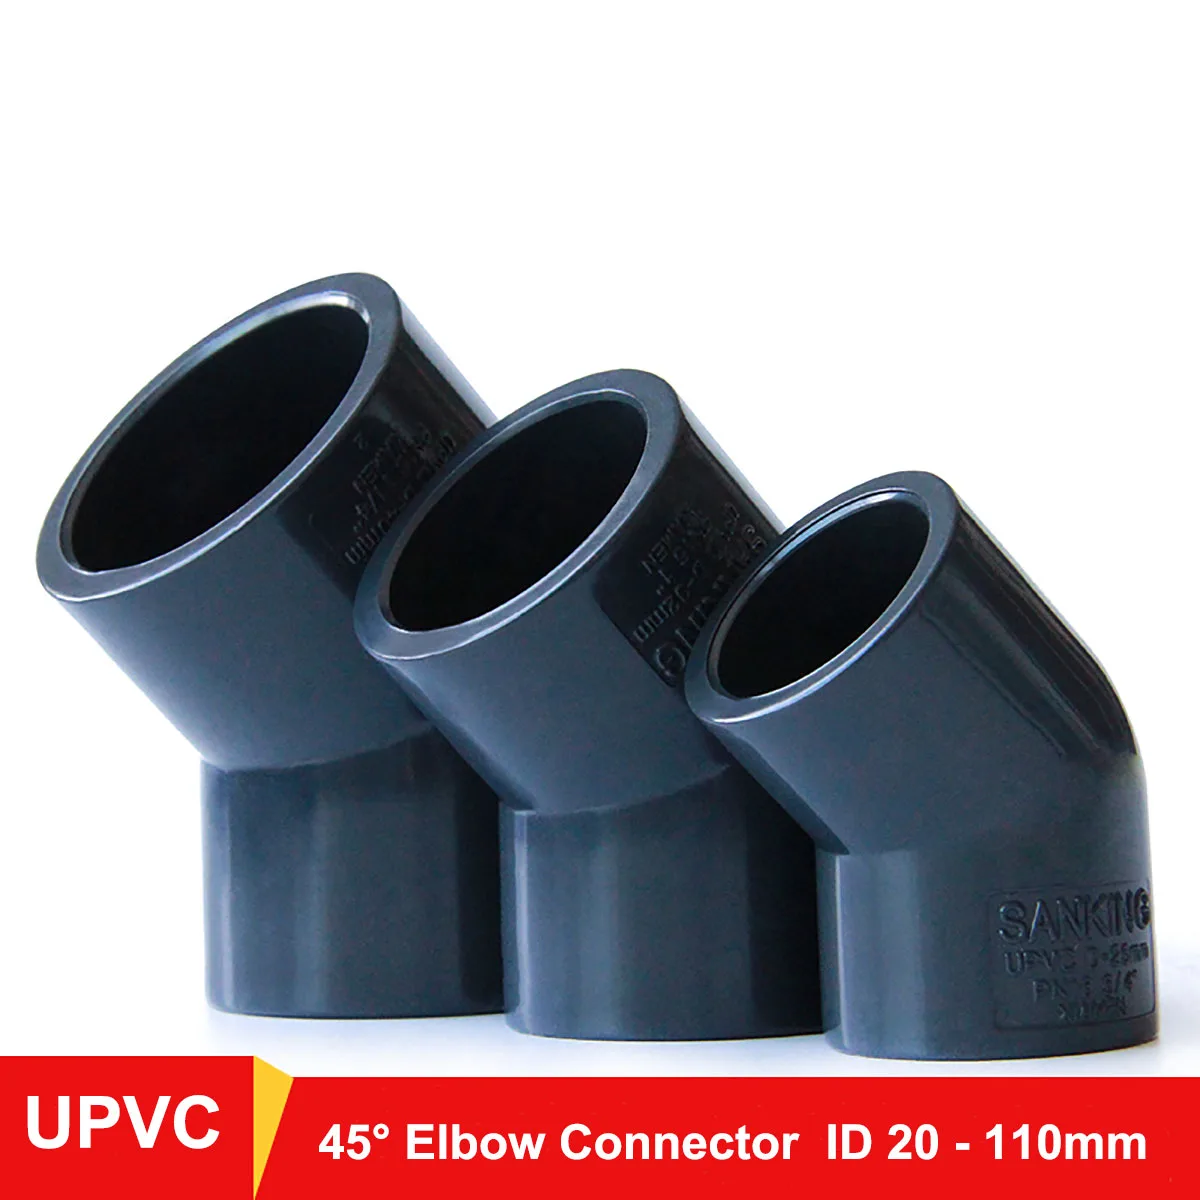 

1pcs ID 20~110mm 45 Degree Elbow Dark Gray UPVC Pipe Fittings Water Tube Joint Coupler Adapter Connector For Aquarium Fish Tank